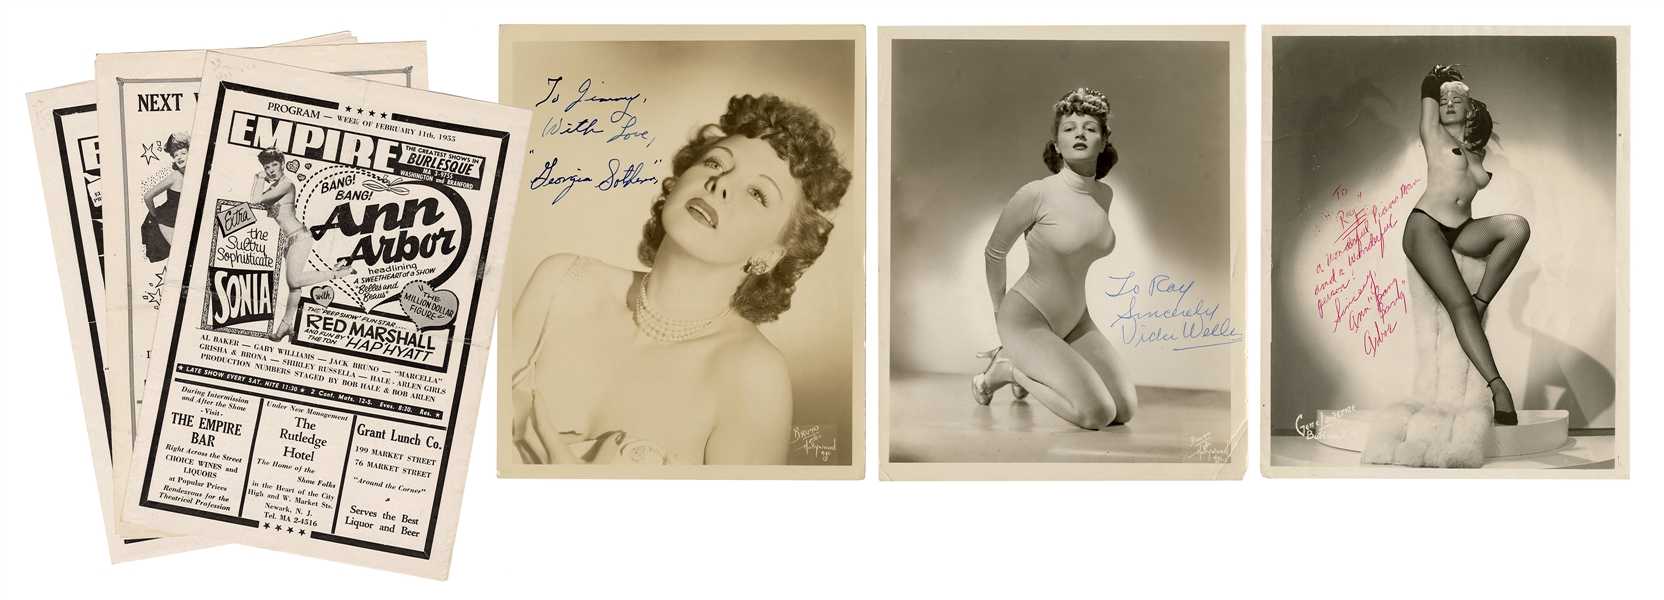 Trio of Burlesque Dancers Signed Photographs, with Programs.